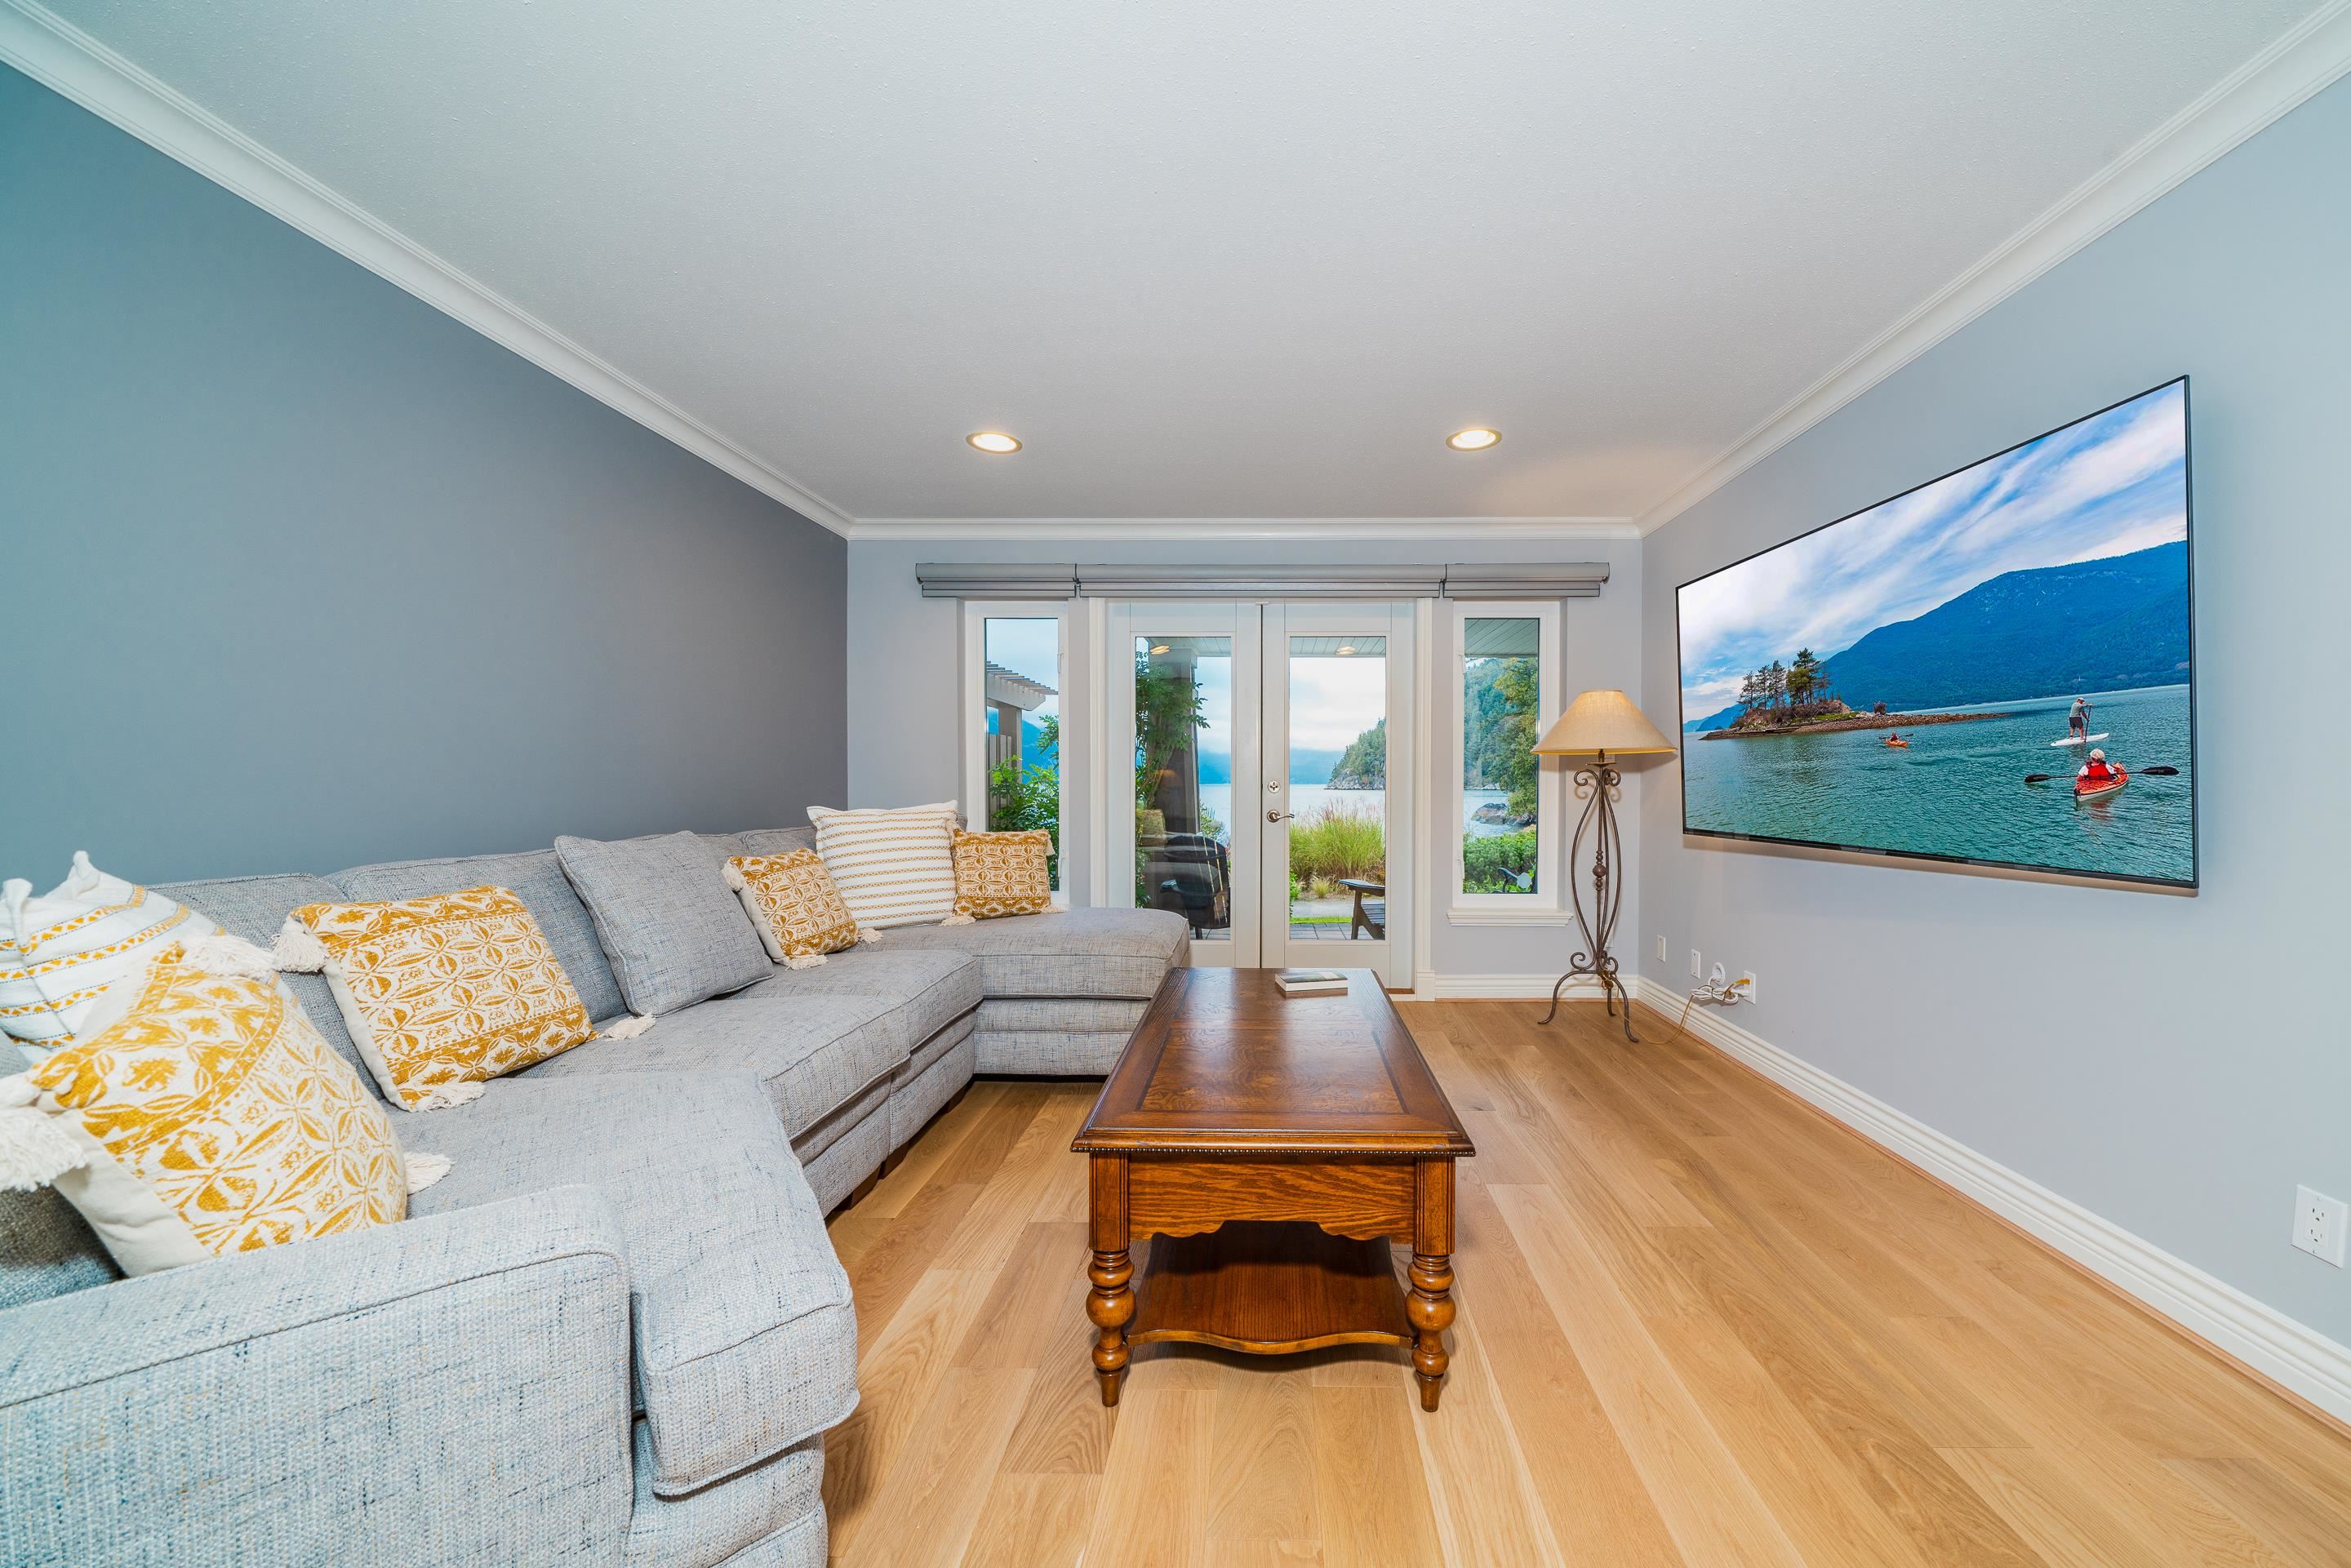 Listing image of 5 BEACH DRIVE